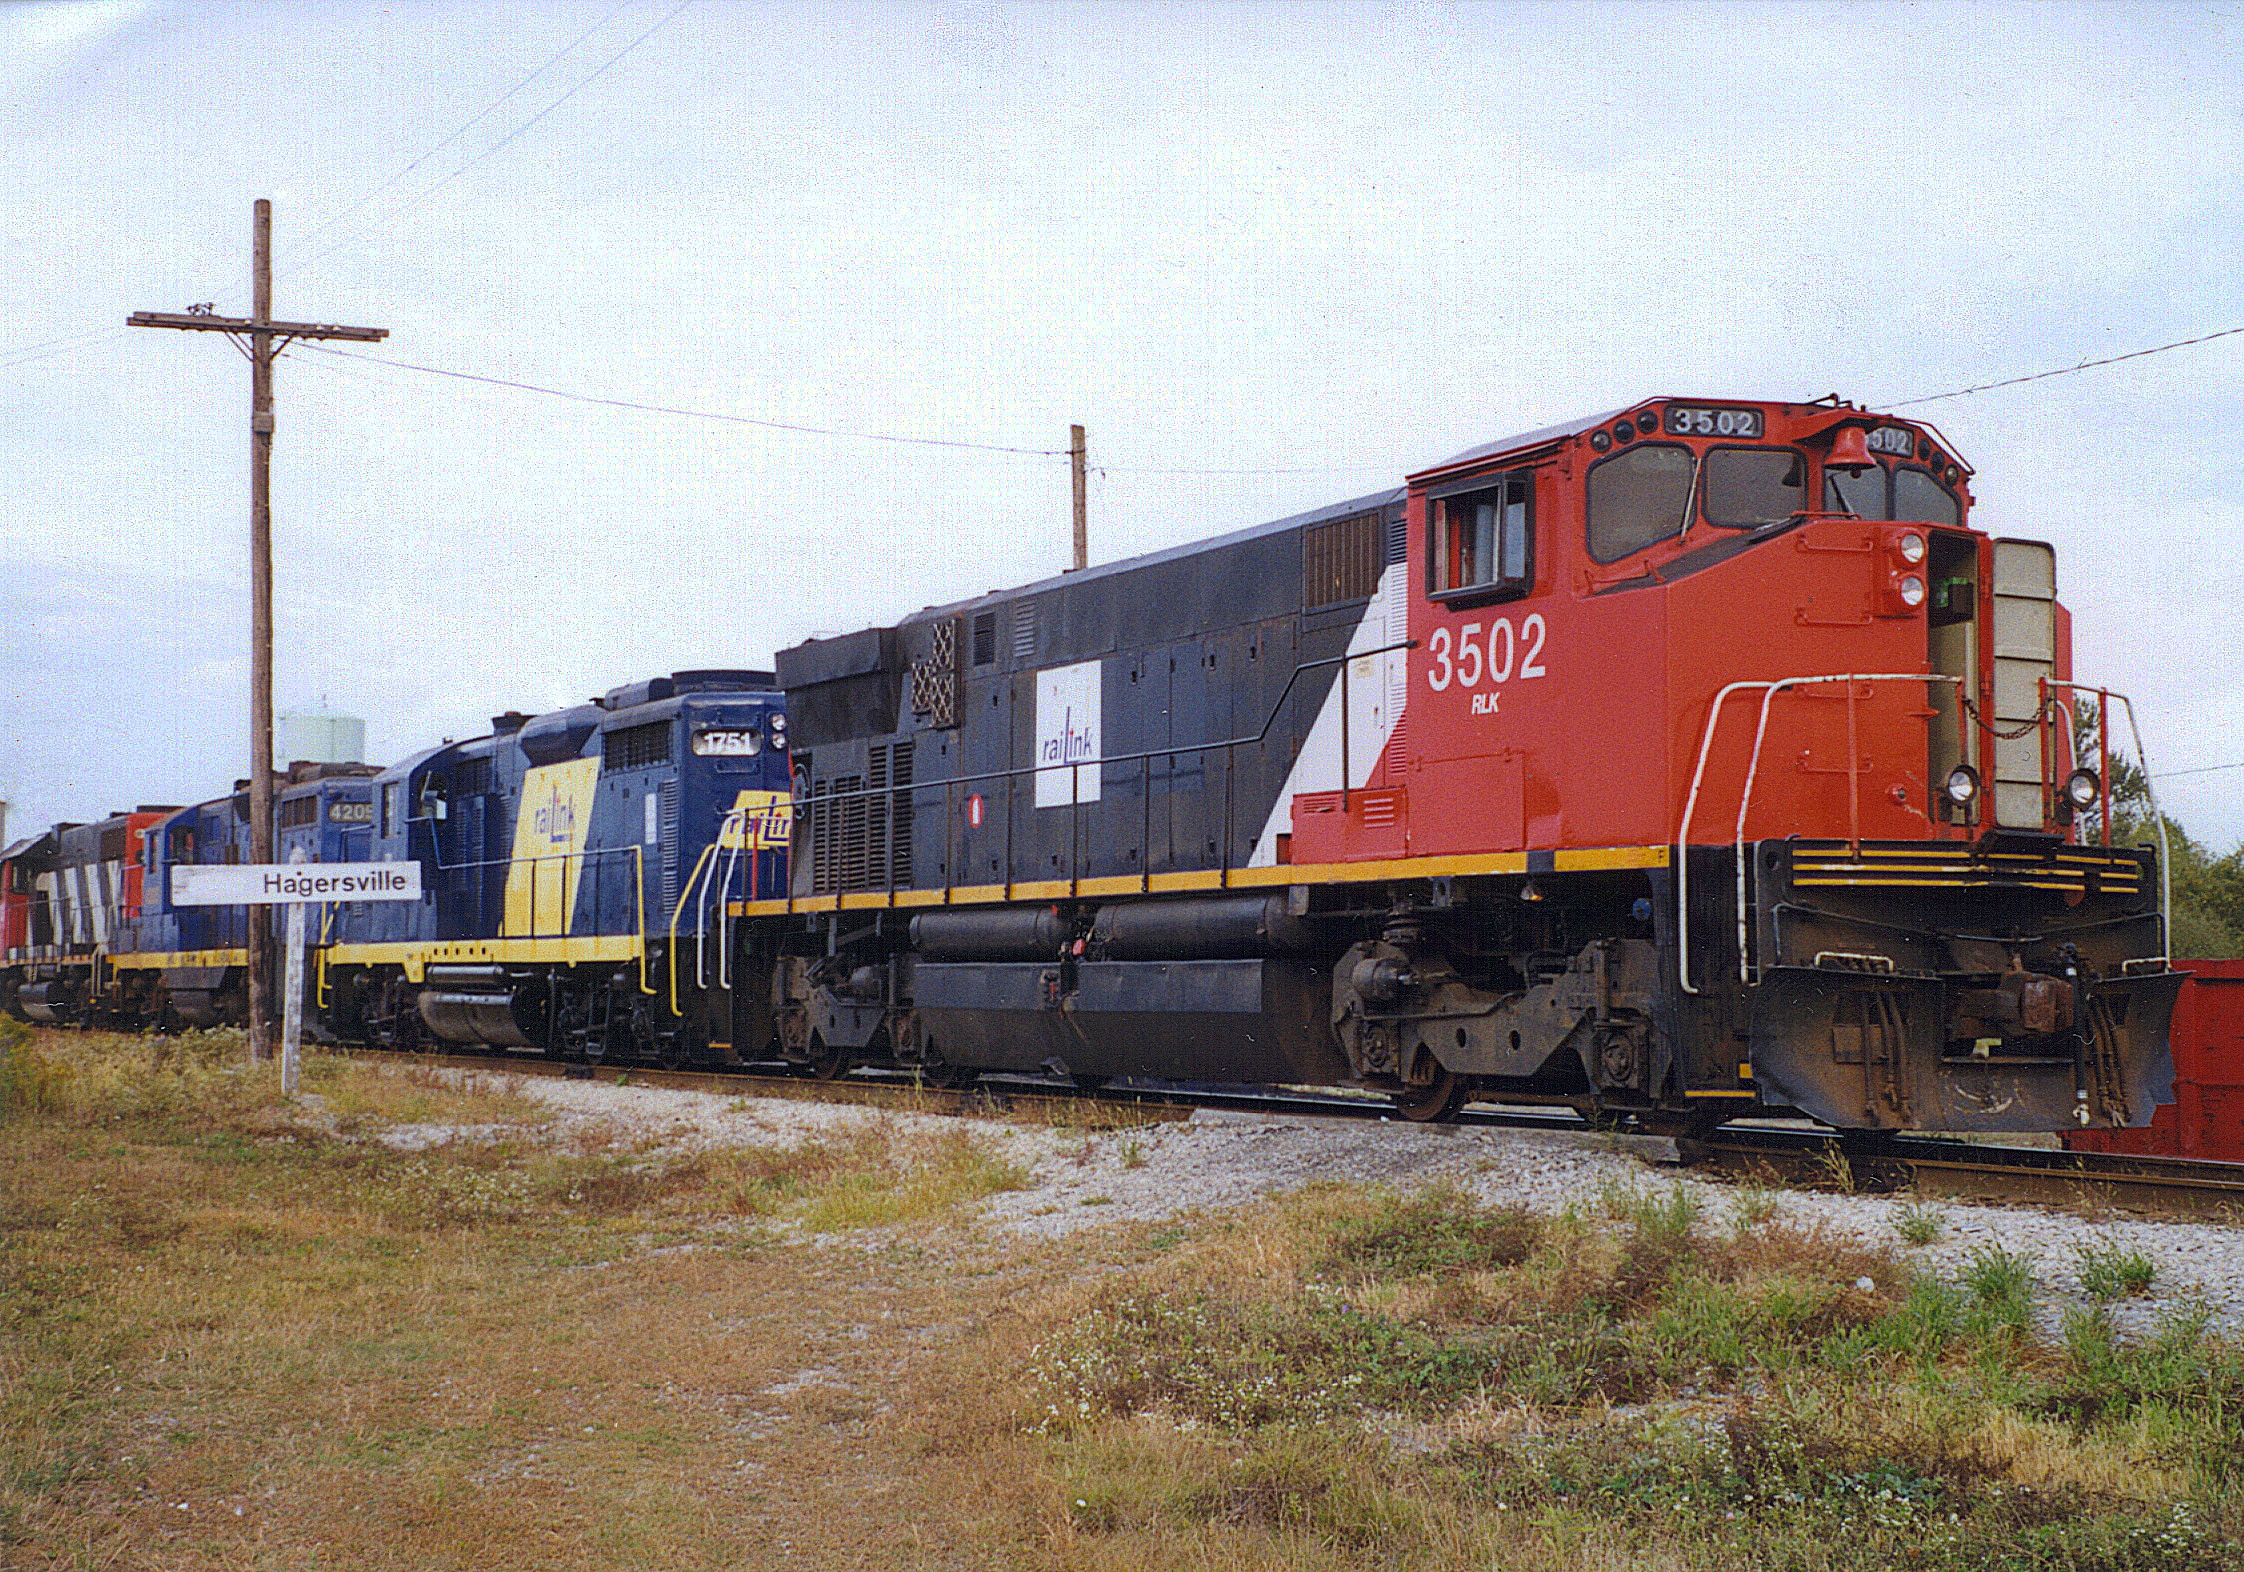  Derek Bishop Photo: Back in the day…RaiLink (now Rail  America) had ex CN M420′s. Here we see RLK 3205 leading three other RaiLink  units through Hagersville Ontario. Picture added with